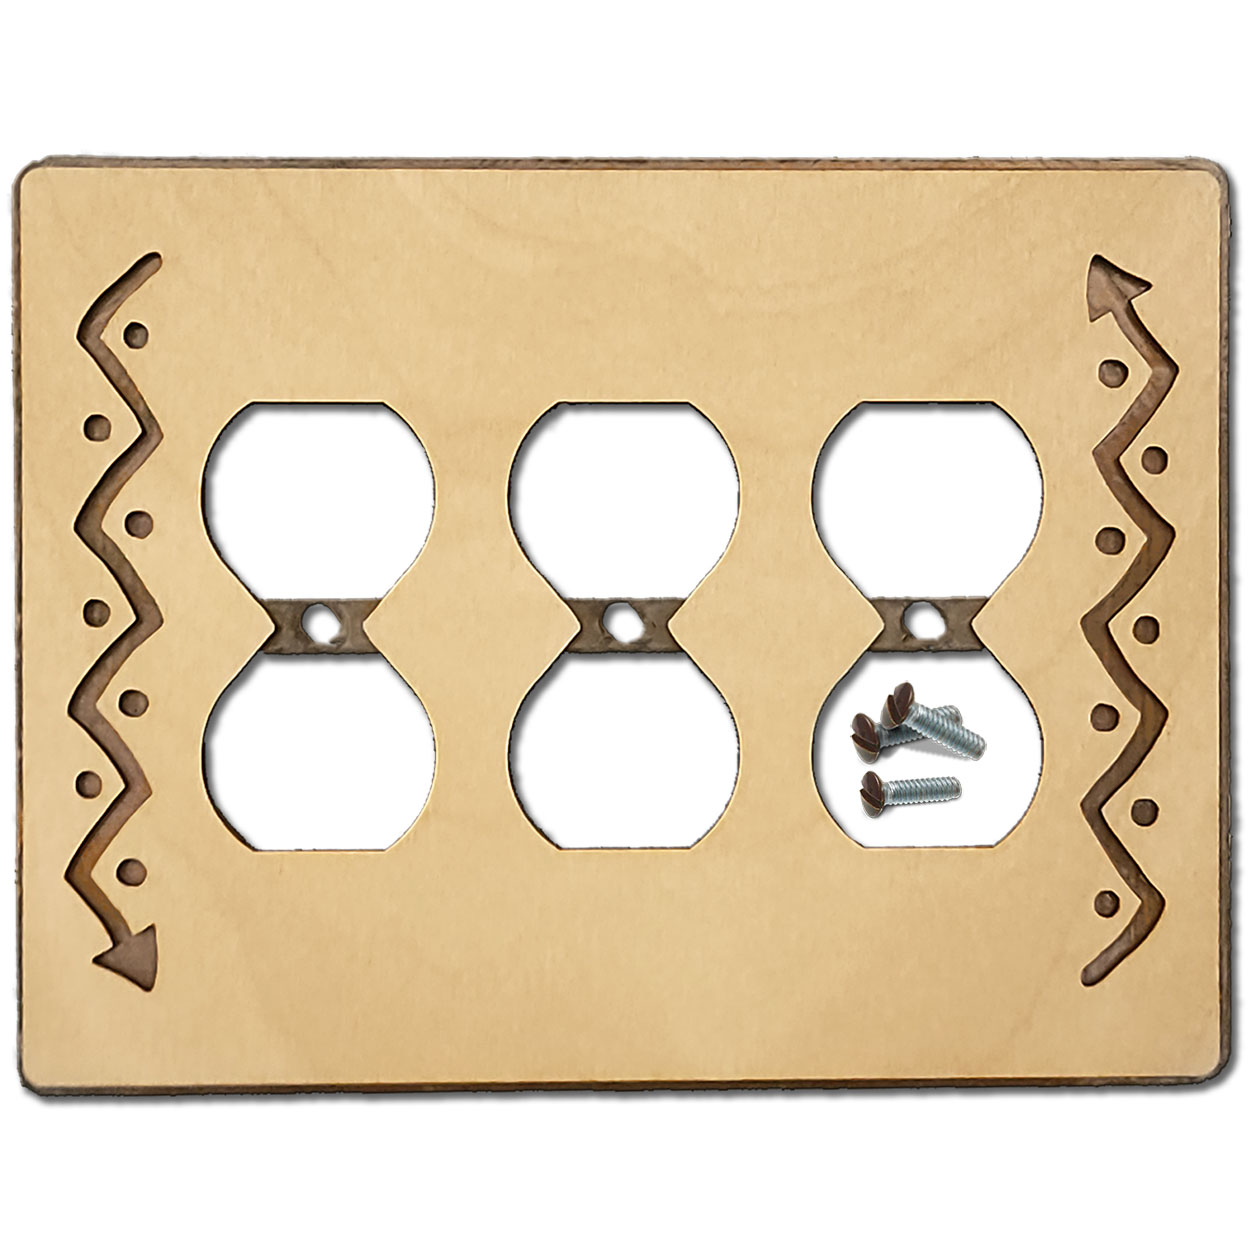 168516 -  Zig-Zag Arrow Southwestern Decor Triple Outlet Cover in Natural Birch